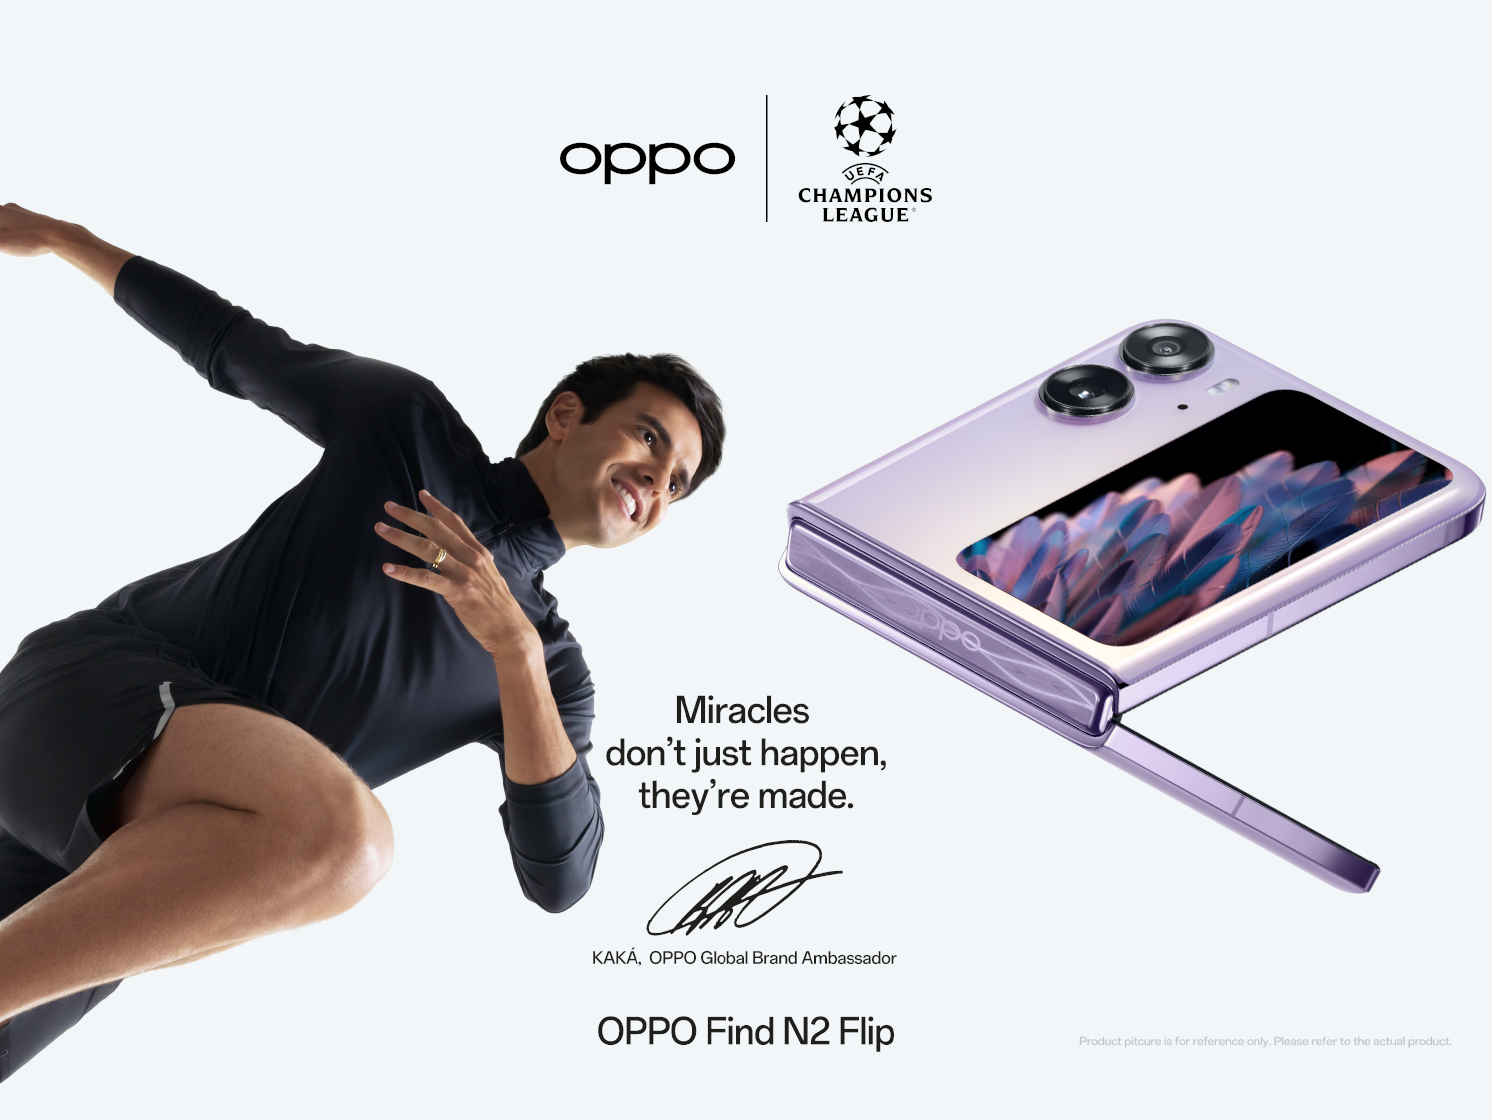 Oppo inks mobile partnership deal with Orlando Pirates